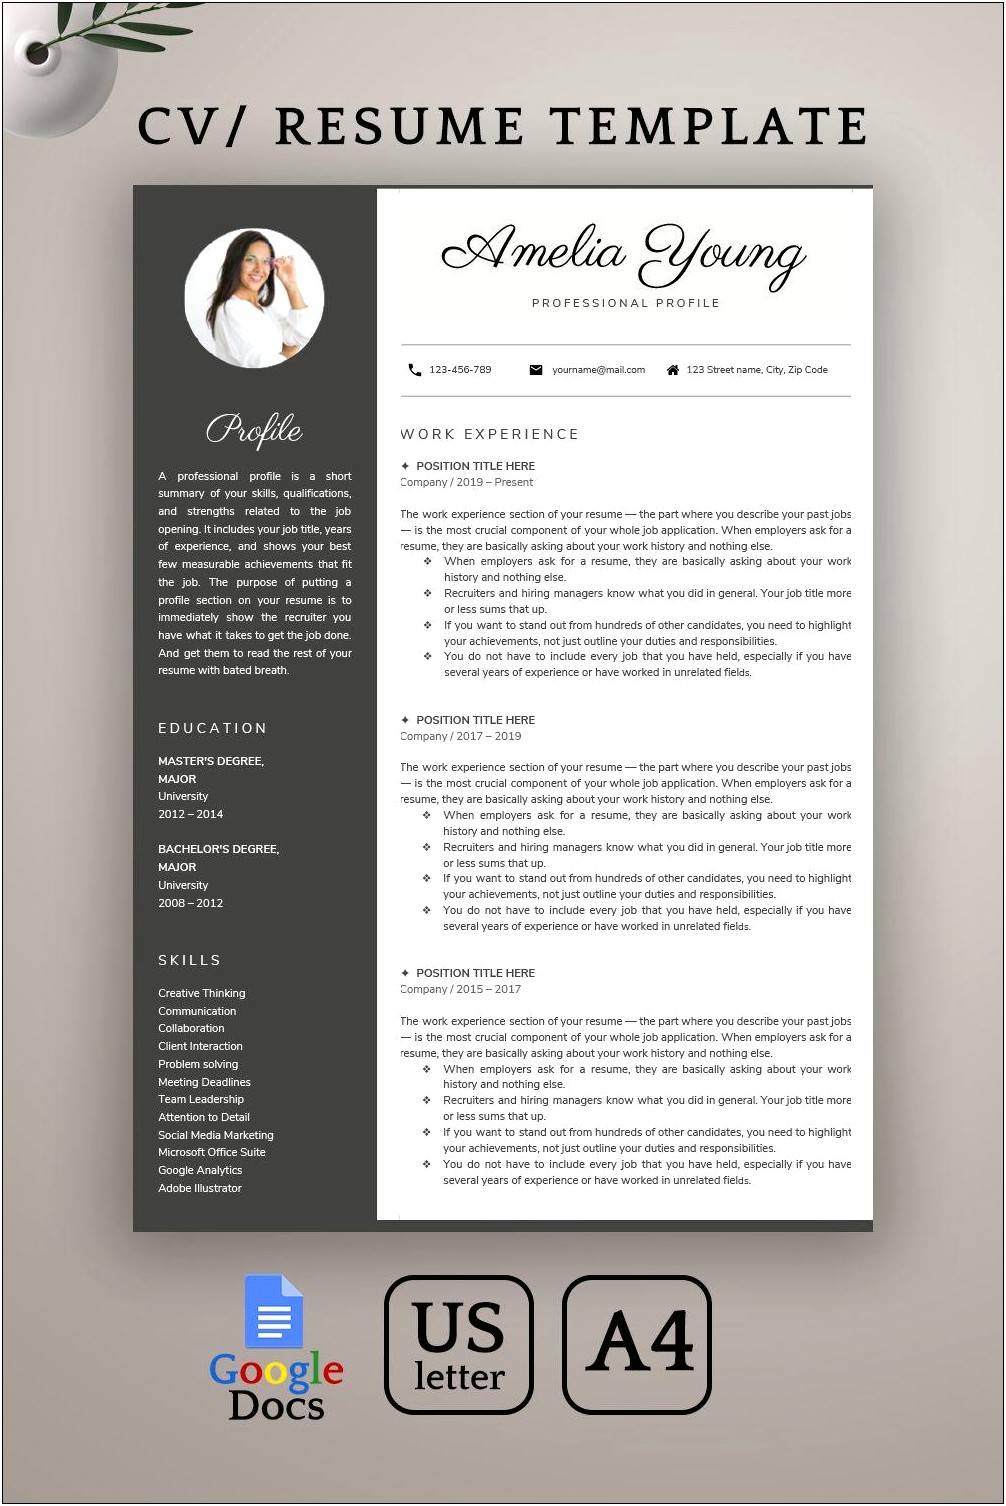 Using Resume Template In Google Docs